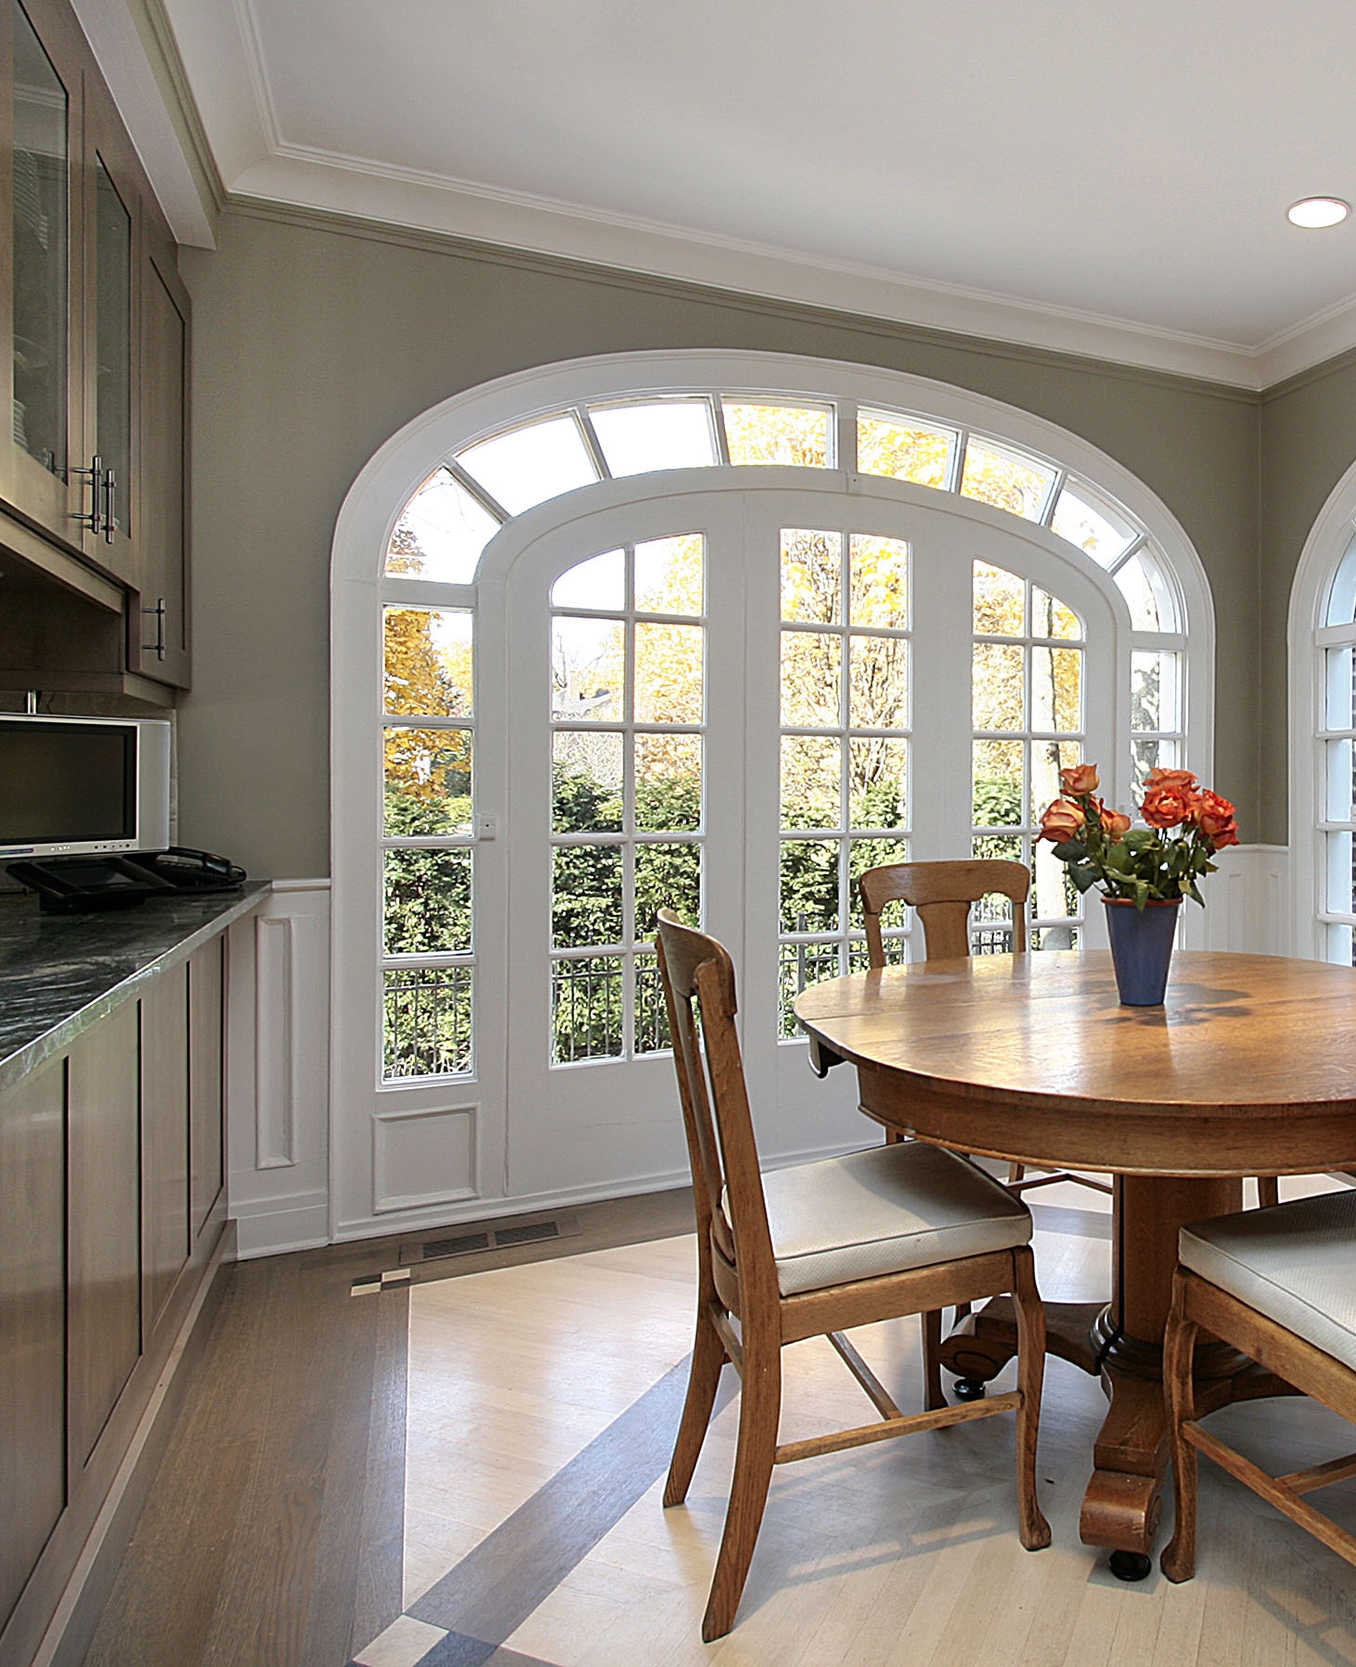 Breathtaking Arched Windows Offer View to Lush Grounds